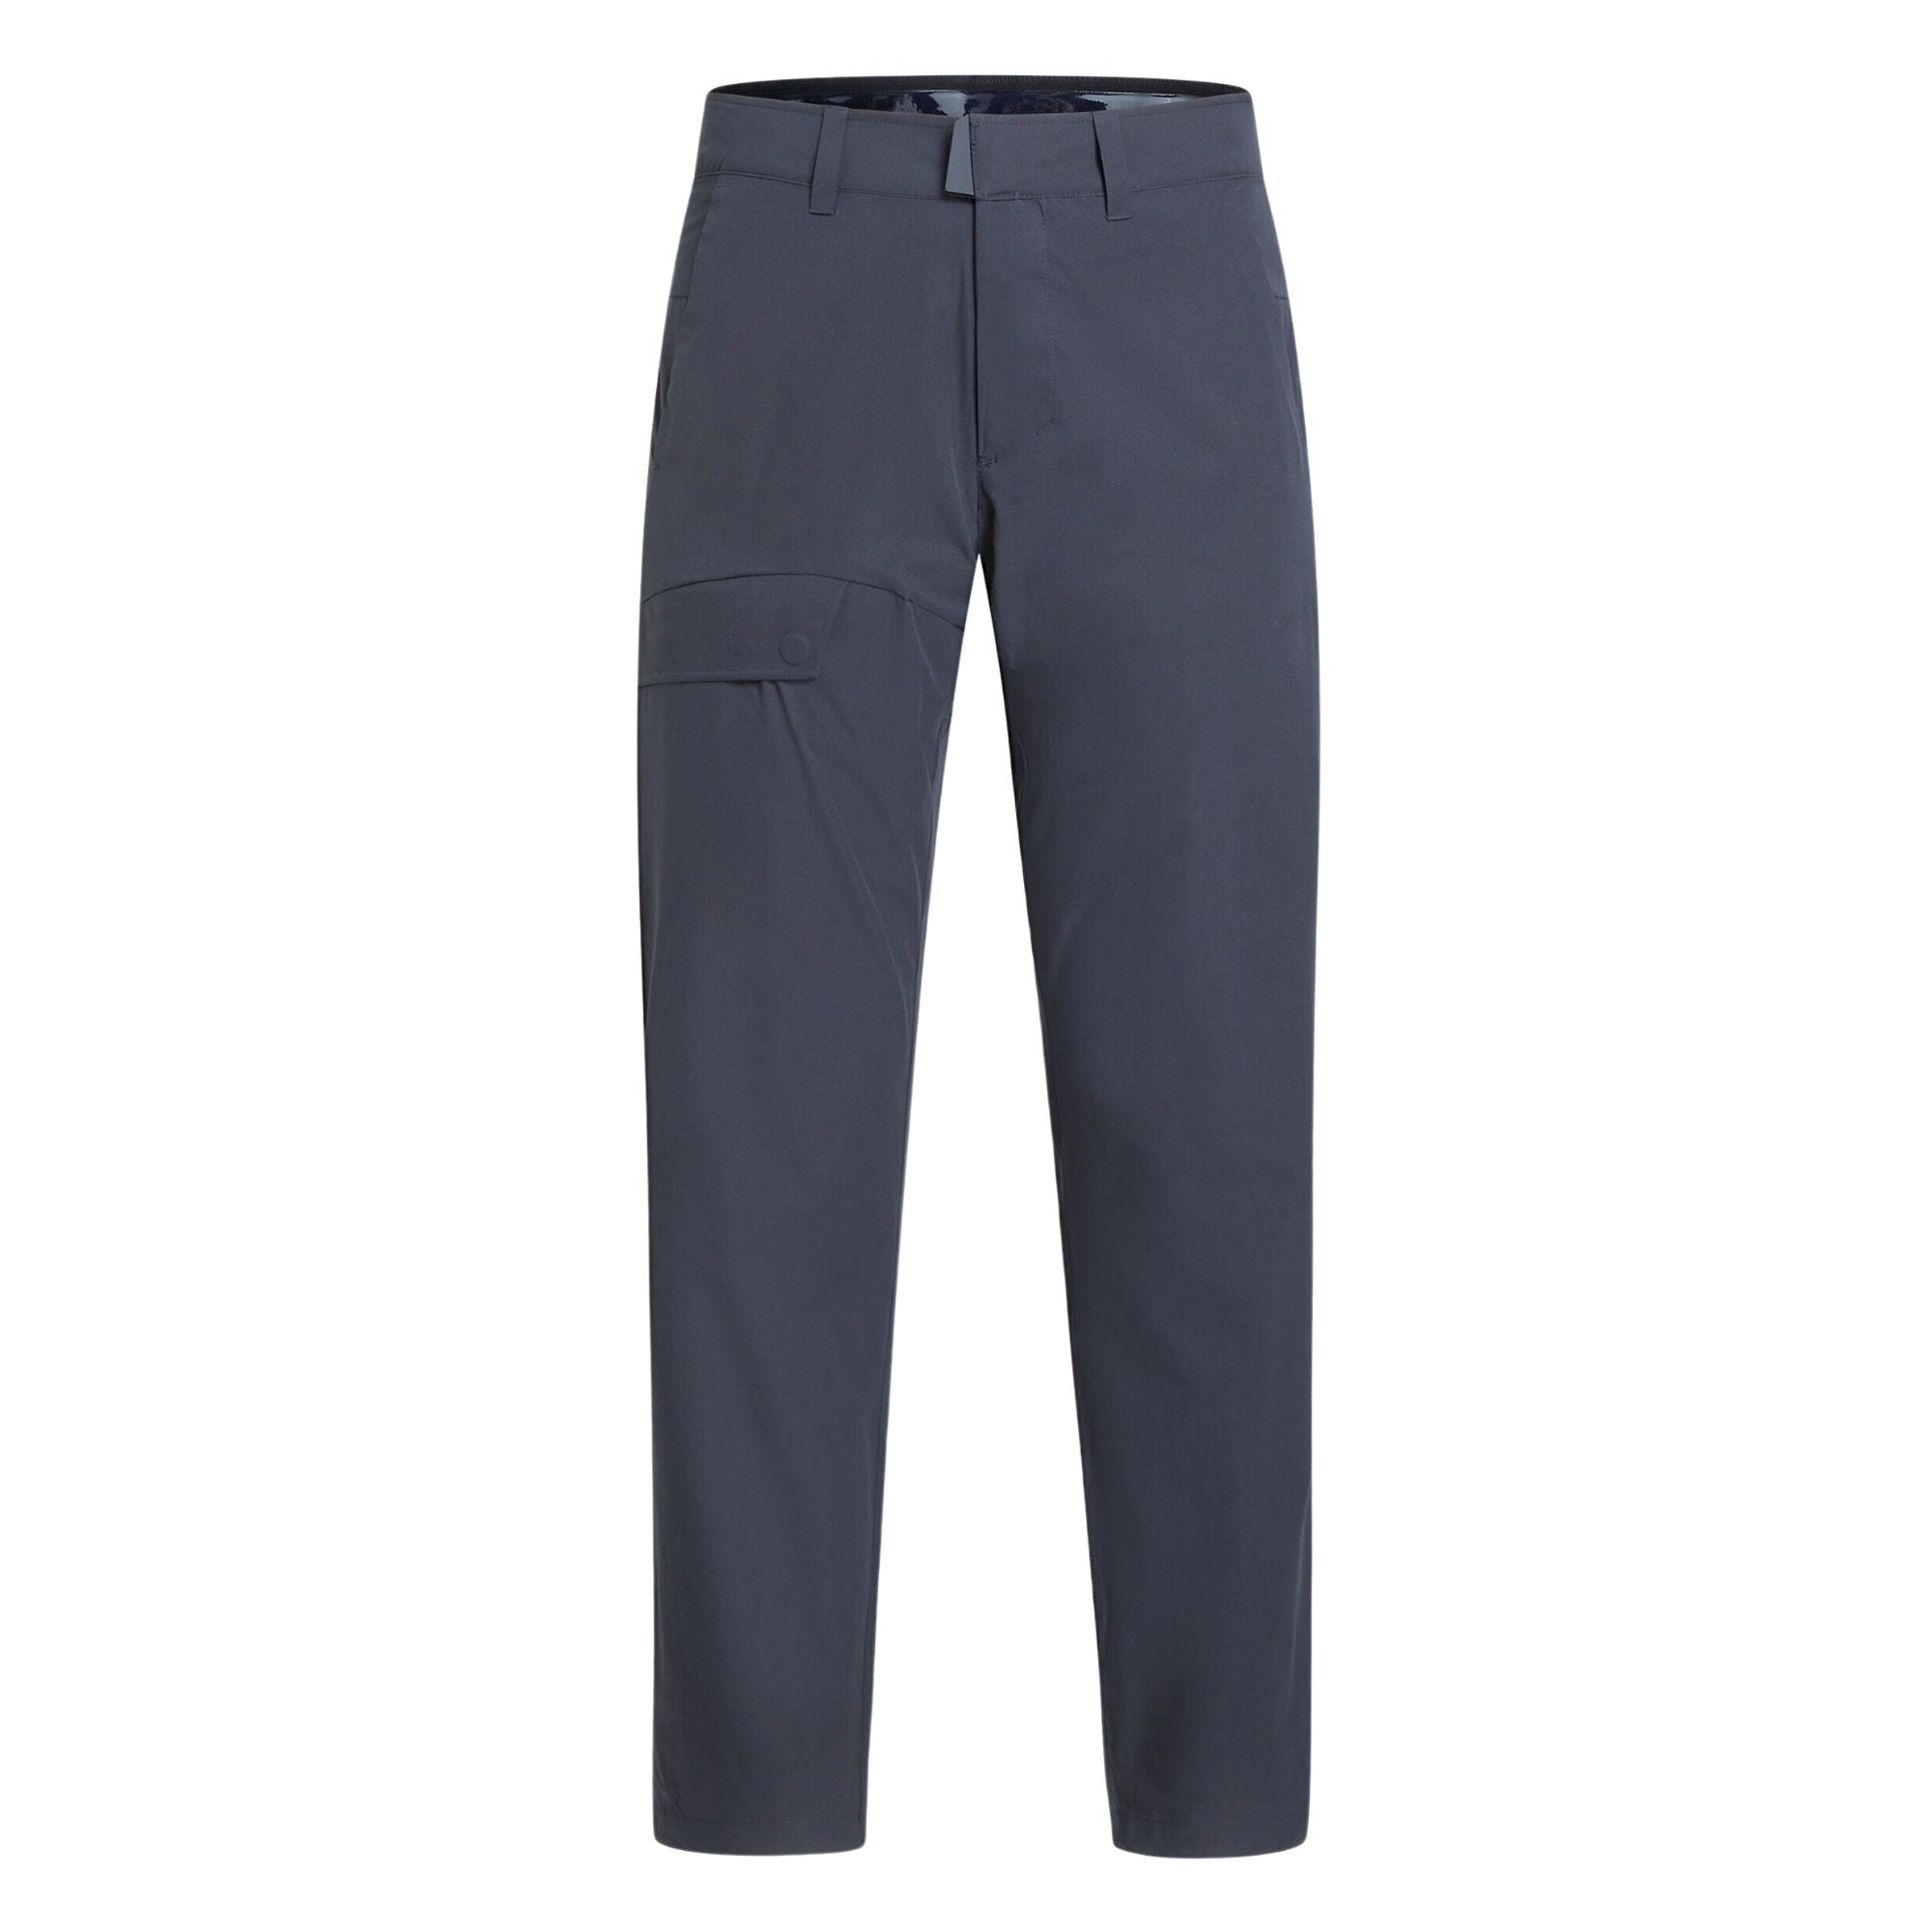 A New Day Gray Dress Pants Size 10 - 47% off